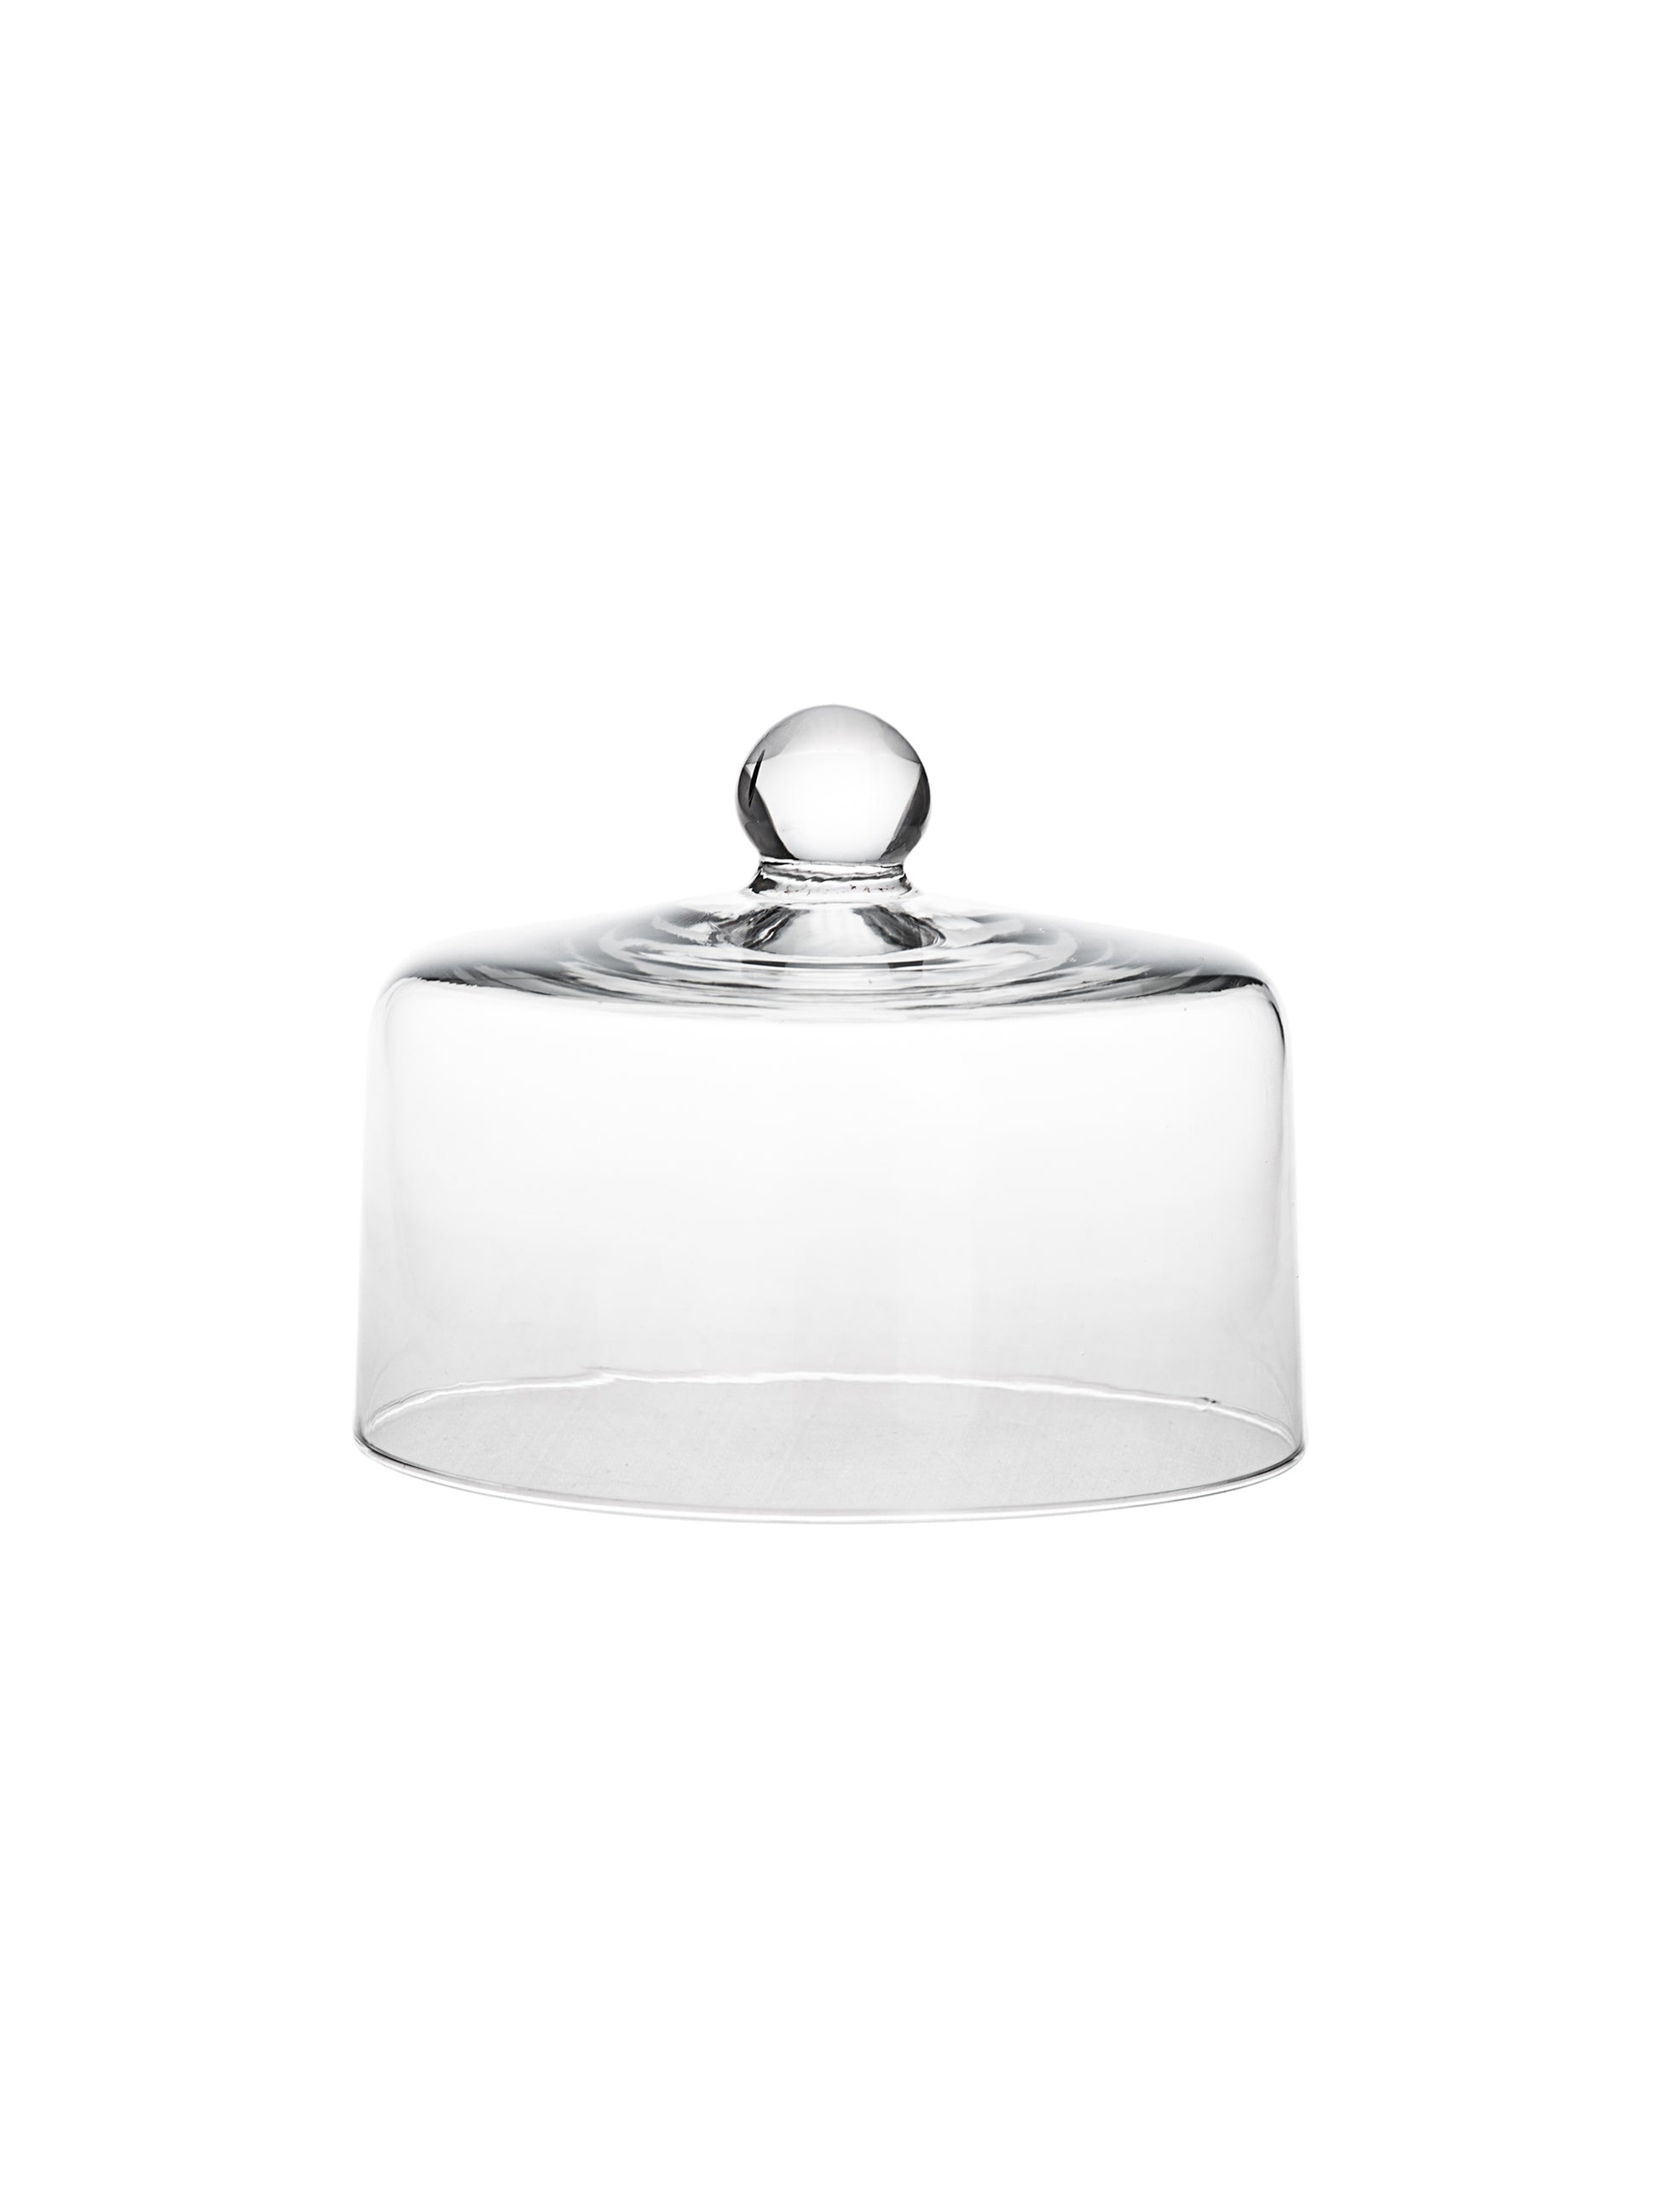 Mosser Crystal Glass Cake Dome Weston Table